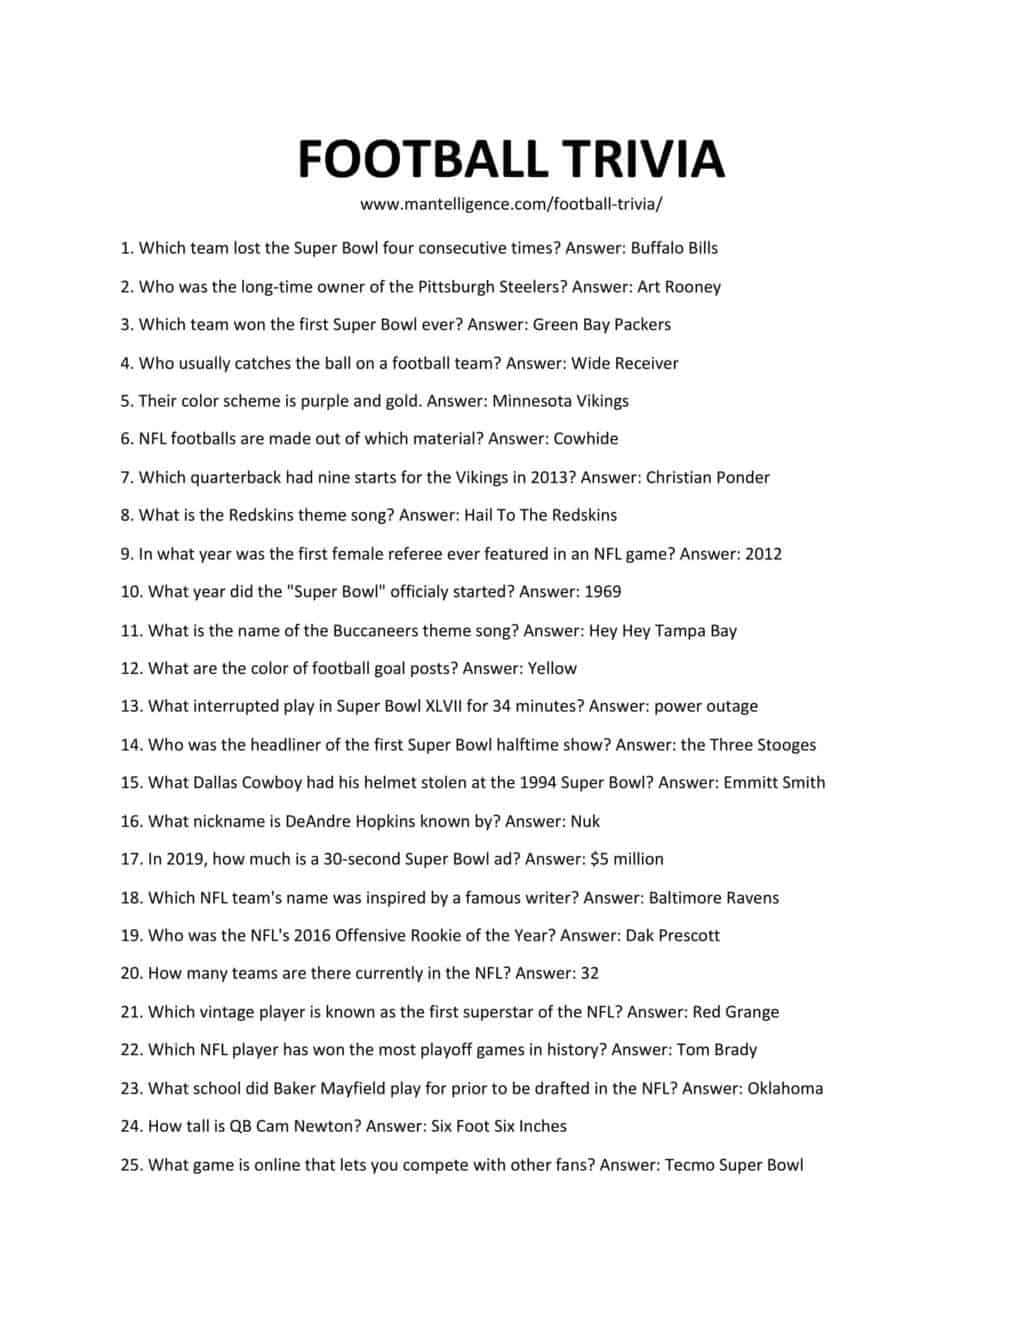 36 Best Football Trivia Questions And Answers - Spark fun conversations.